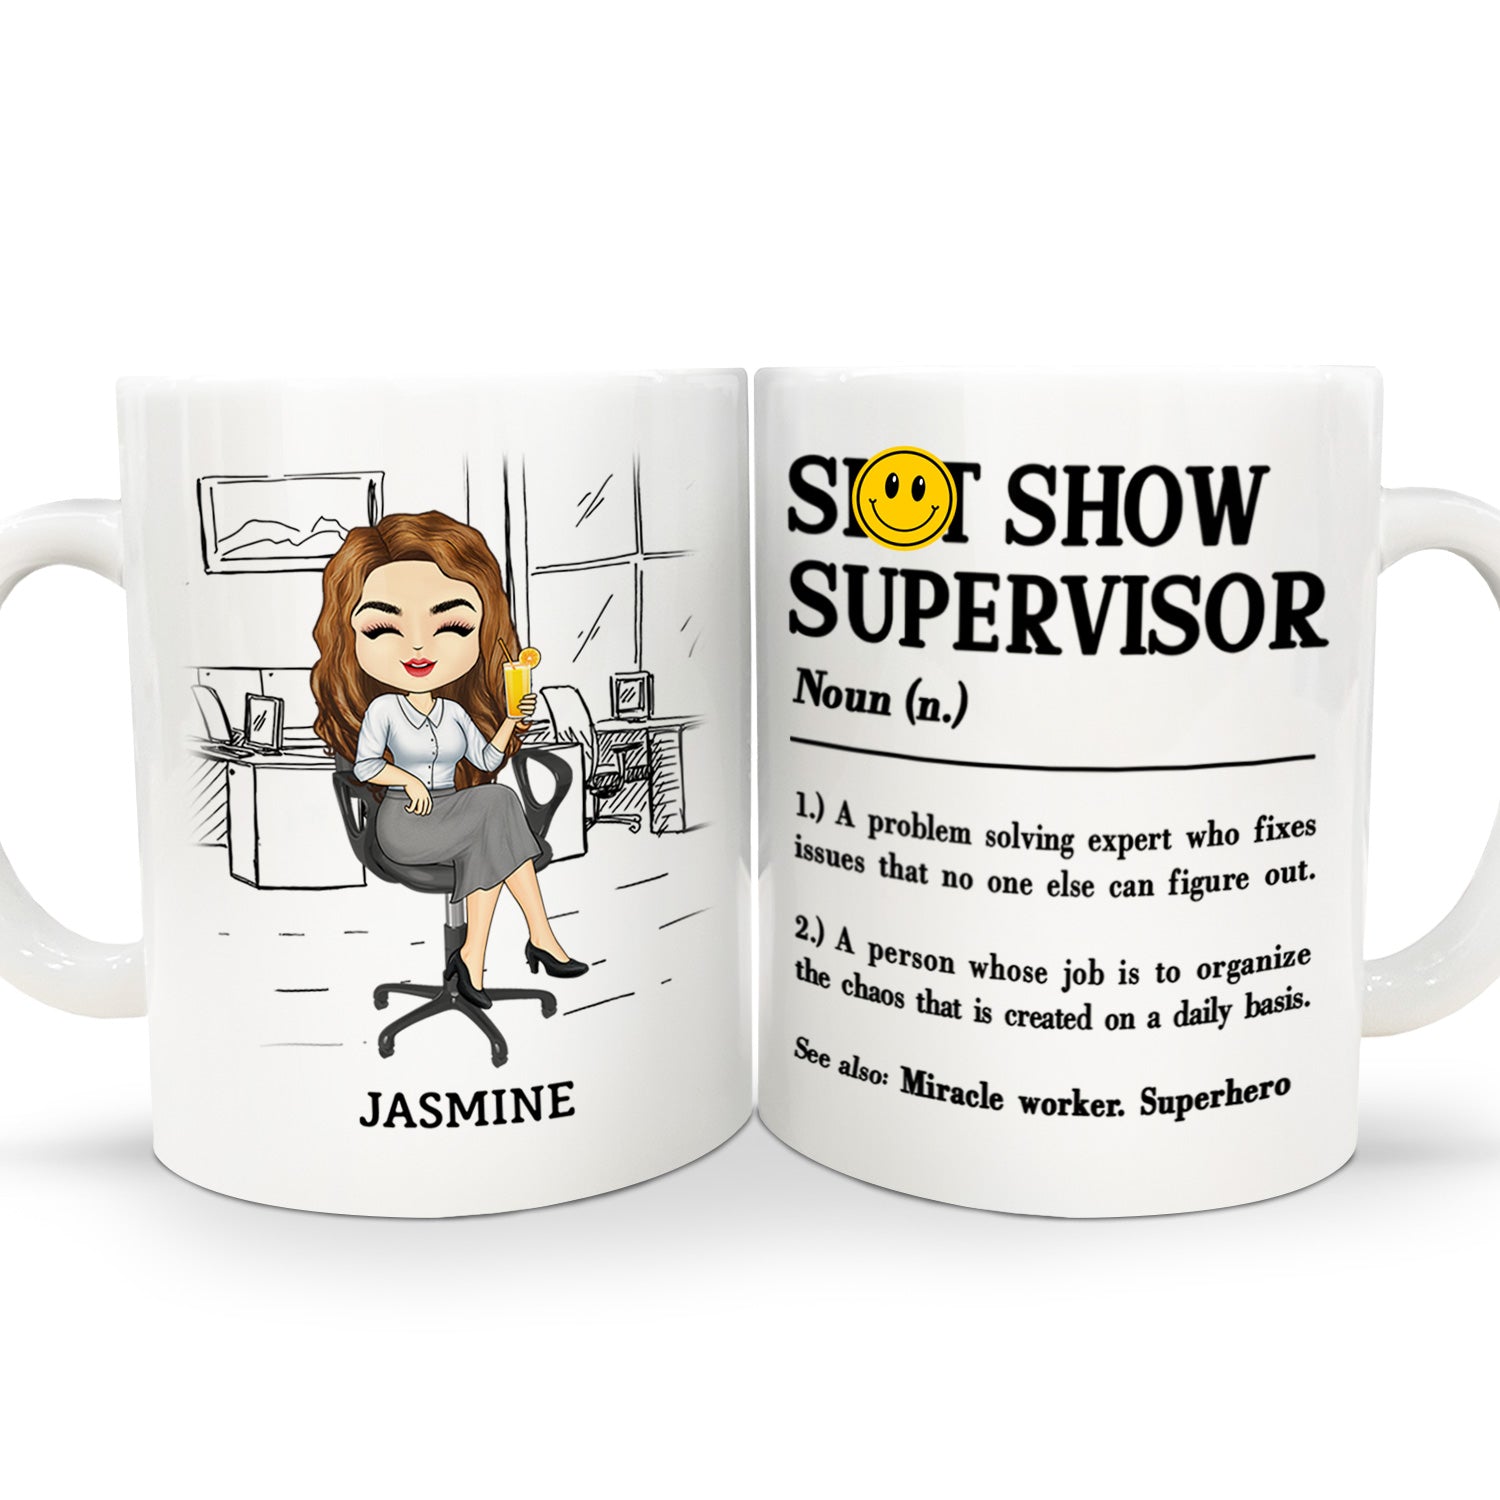 Colleagues Show Supervisor - Funny Gift For Colleagues, Gift For Yourself - Personalized White Edge-to-Edge Mug